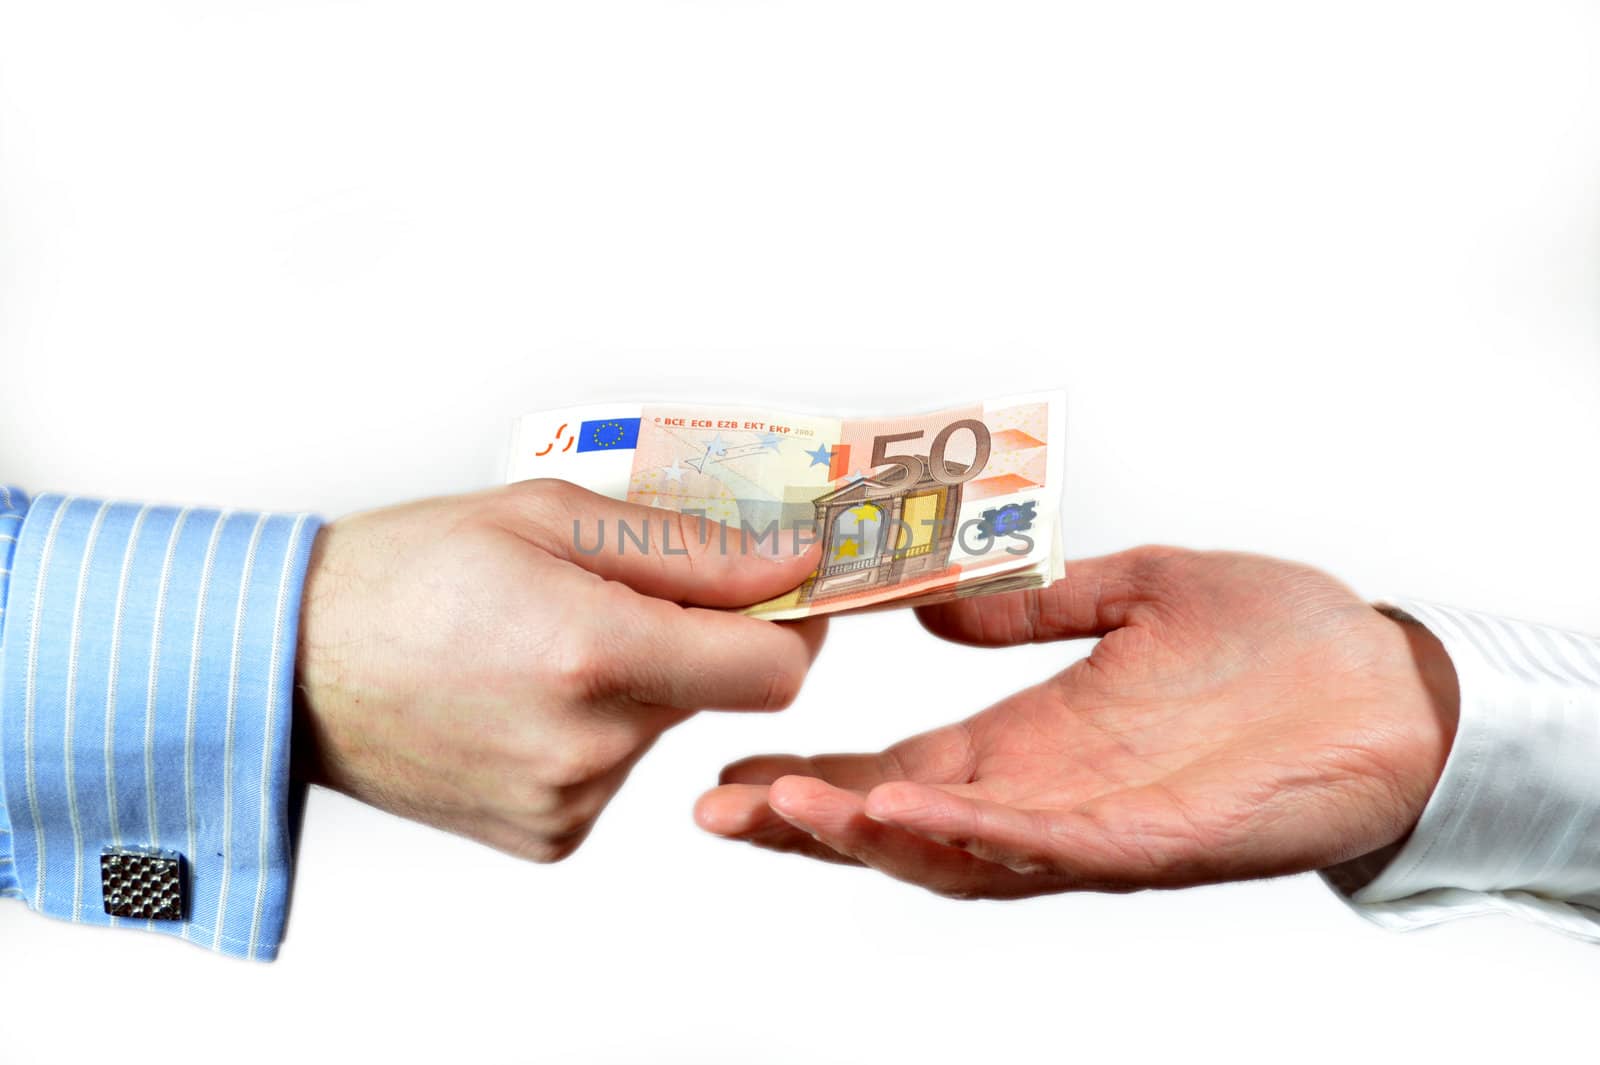 Male hand paying 50 euros to someone else, isolated on white